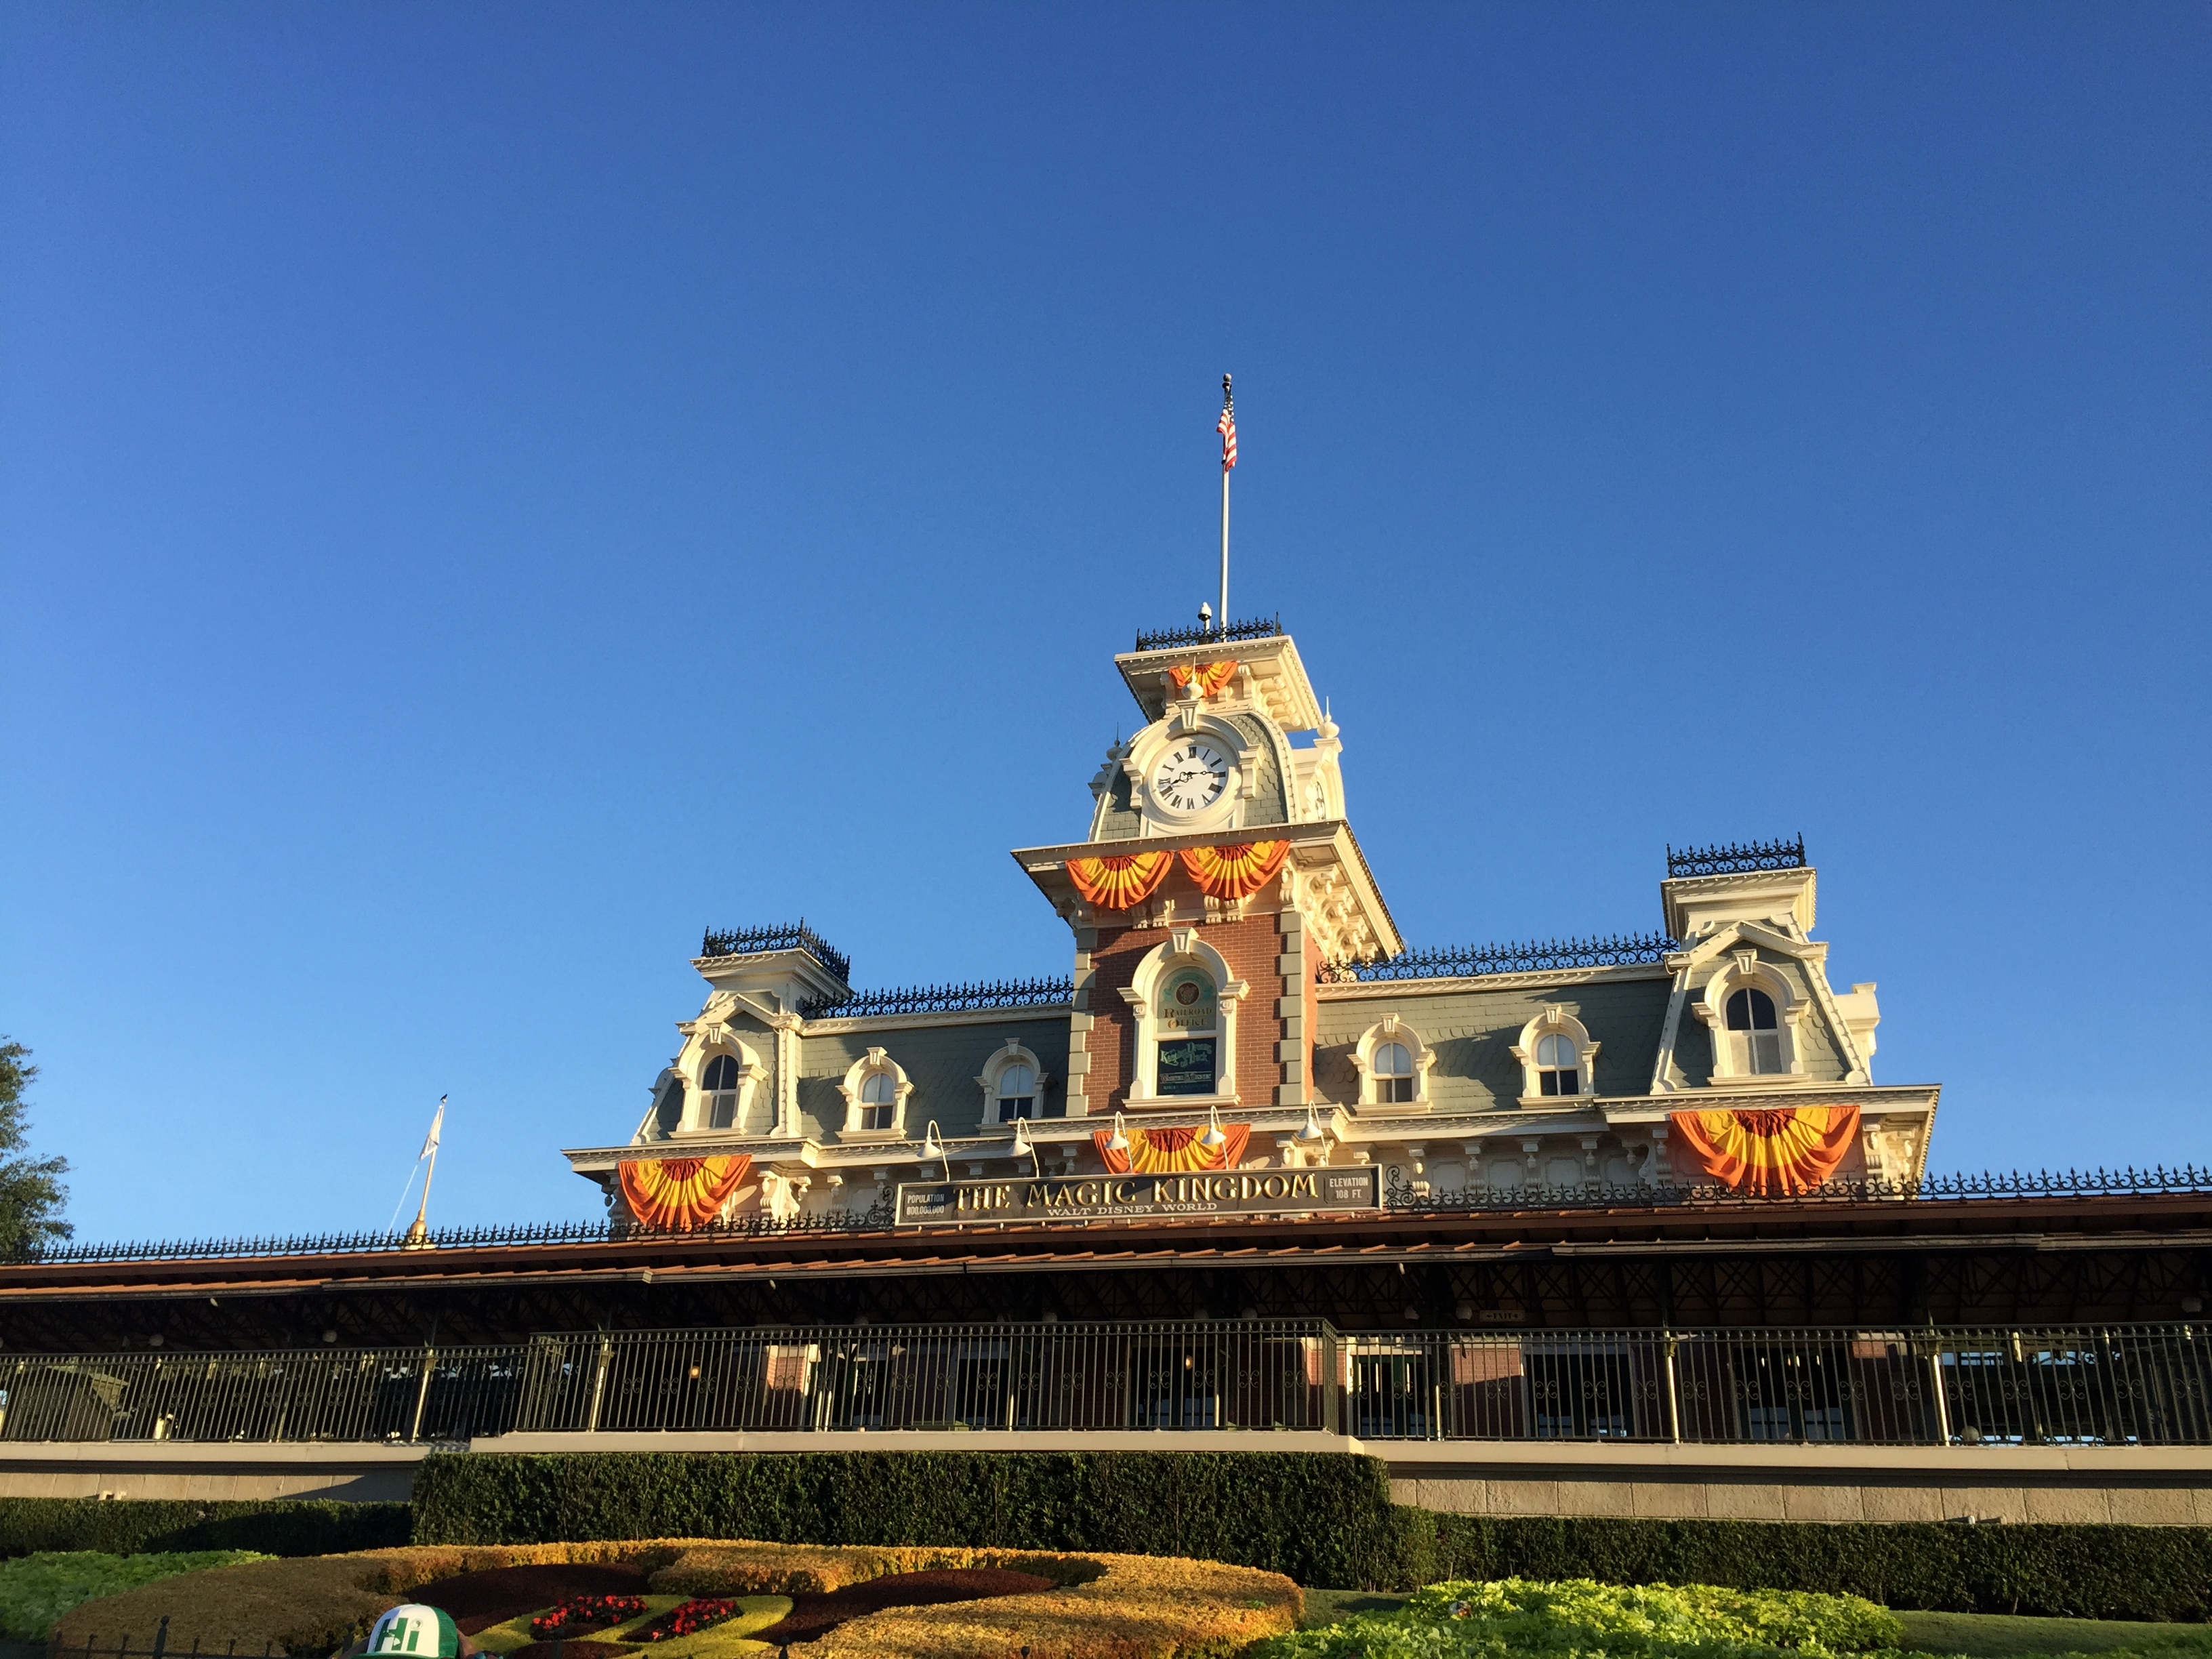 How we (almost) saw everything at the Magic Kingdom in one day